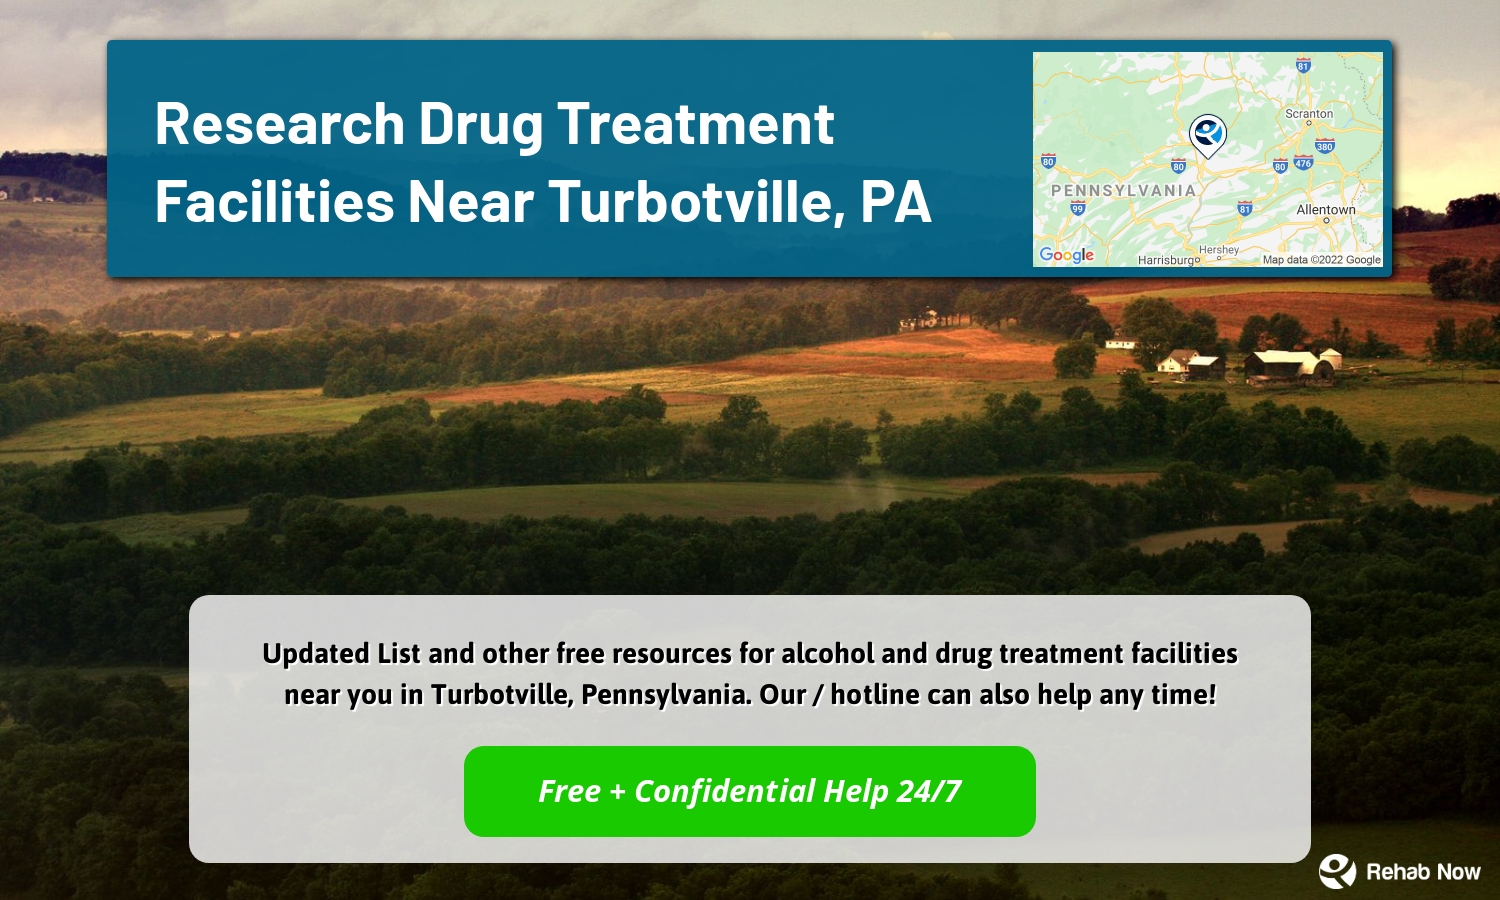  Updated List and other free resources for alcohol and drug treatment facilities near you in Turbotville, Pennsylvania. Our / hotline can also help any time!